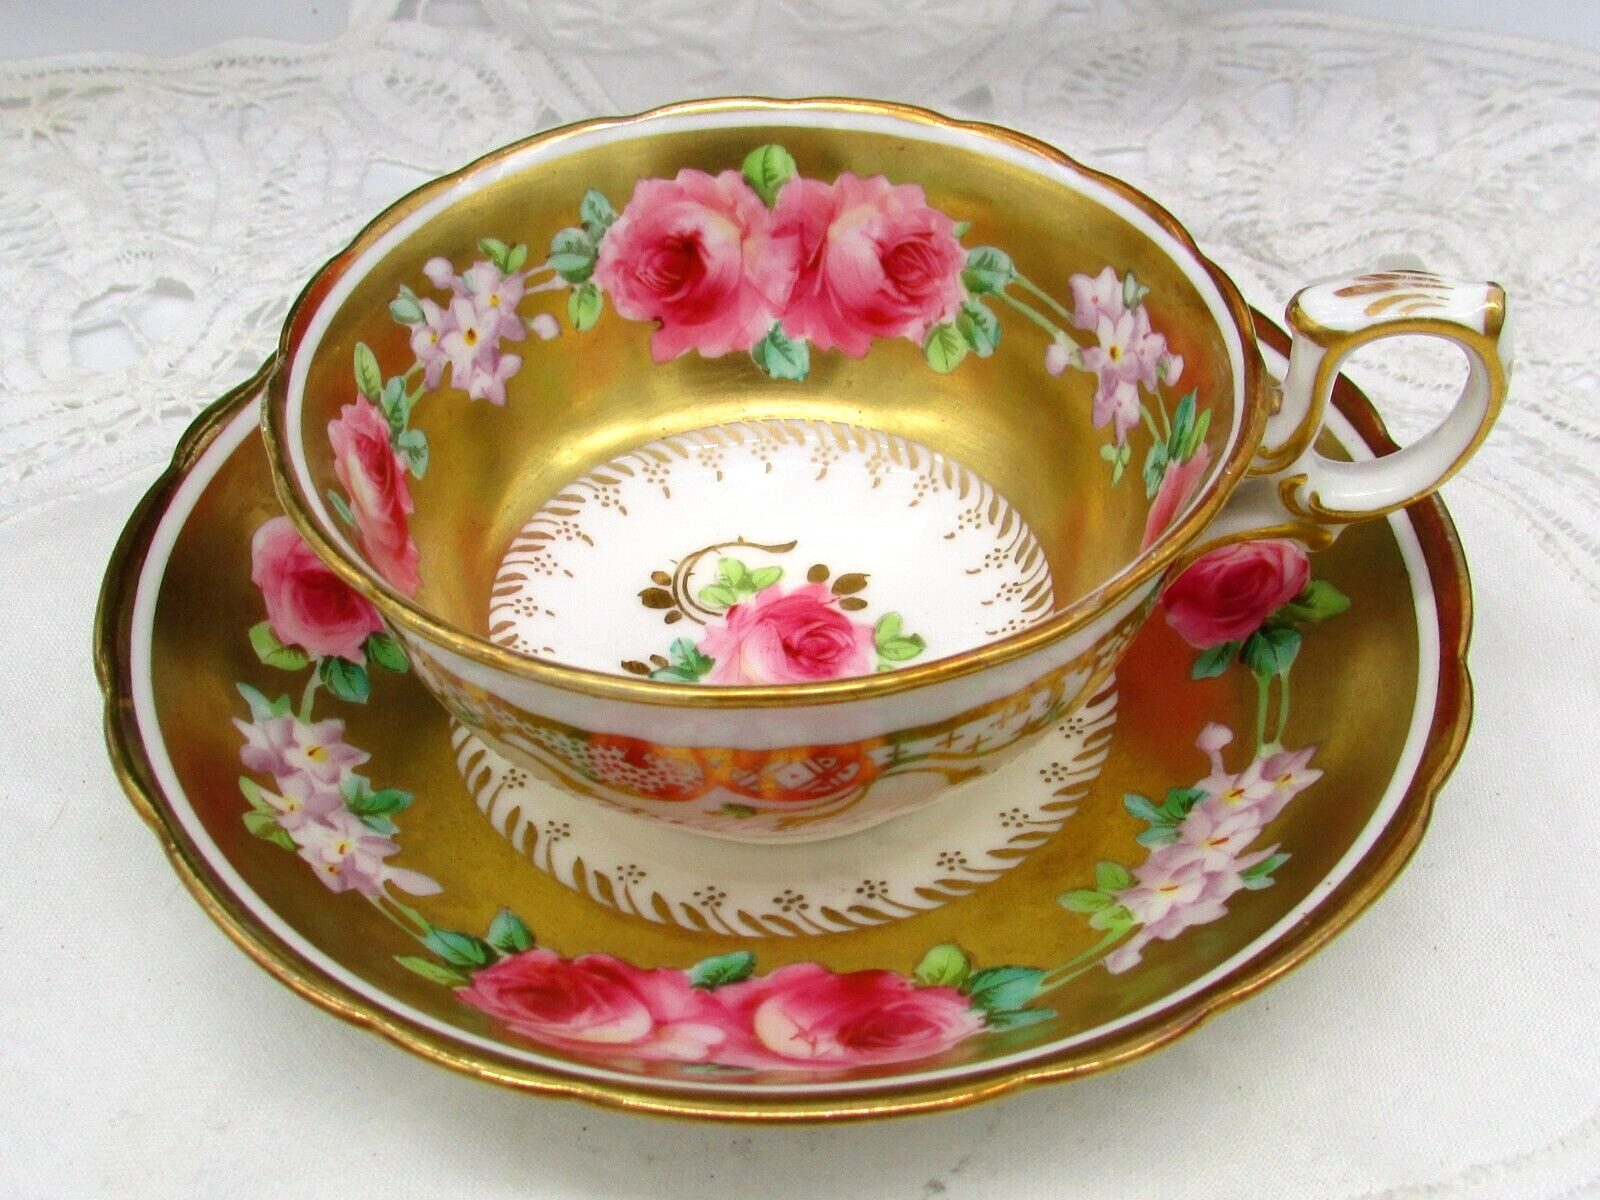 ADDERLEY ANTIQUE HAND PAINTED PINK ROSES HEAVY GOLD GILT DEMITASSE CUP & SAUCER